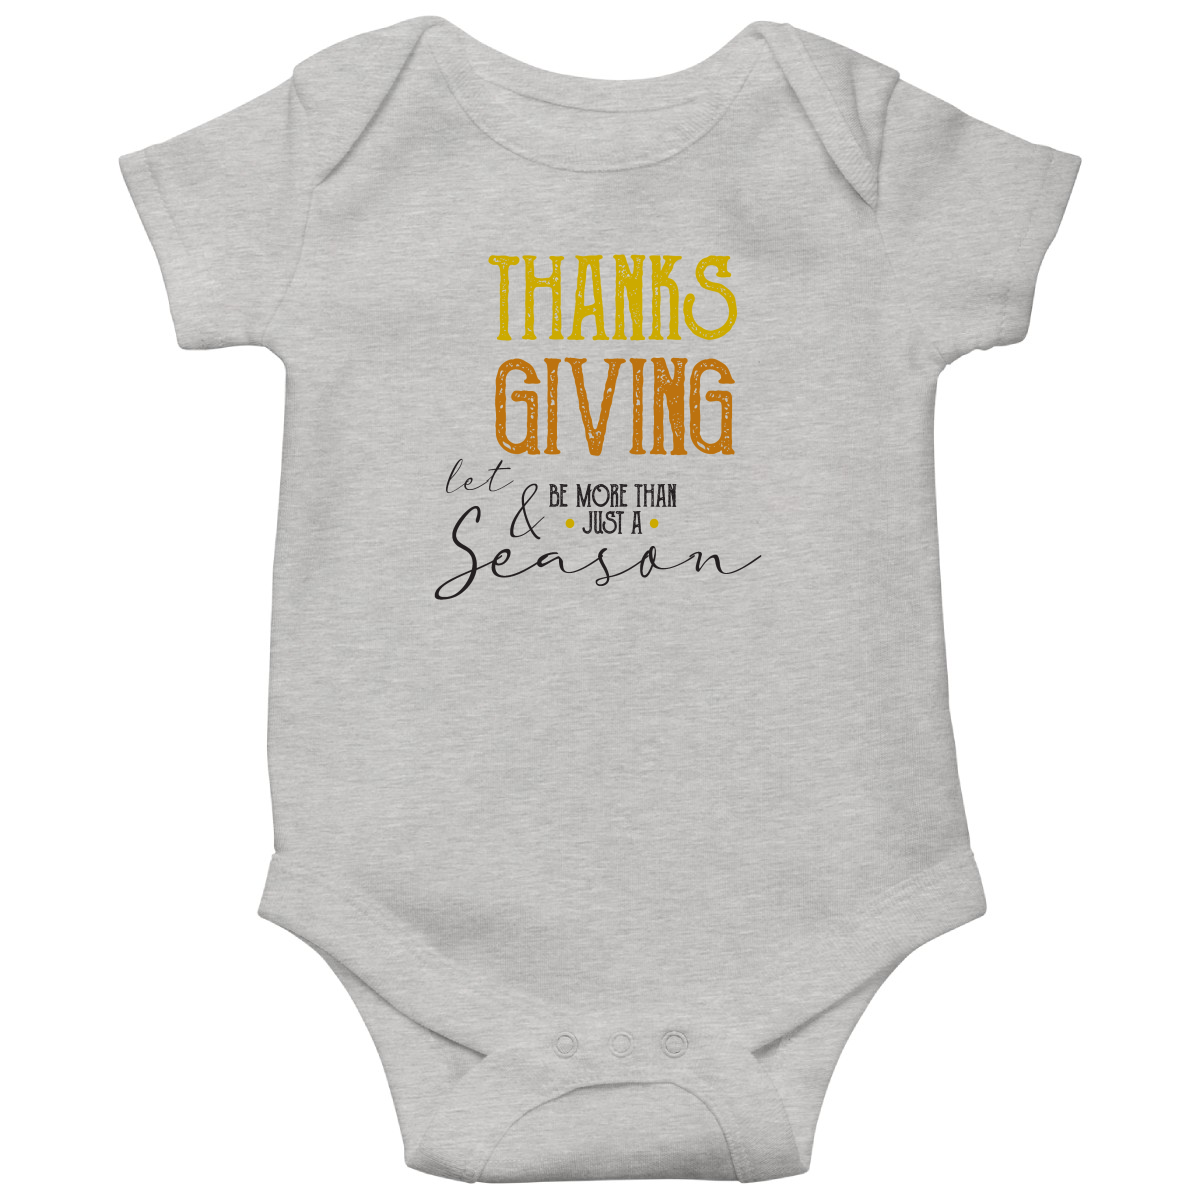 Thanks and Giving  Baby Bodysuits | Gray